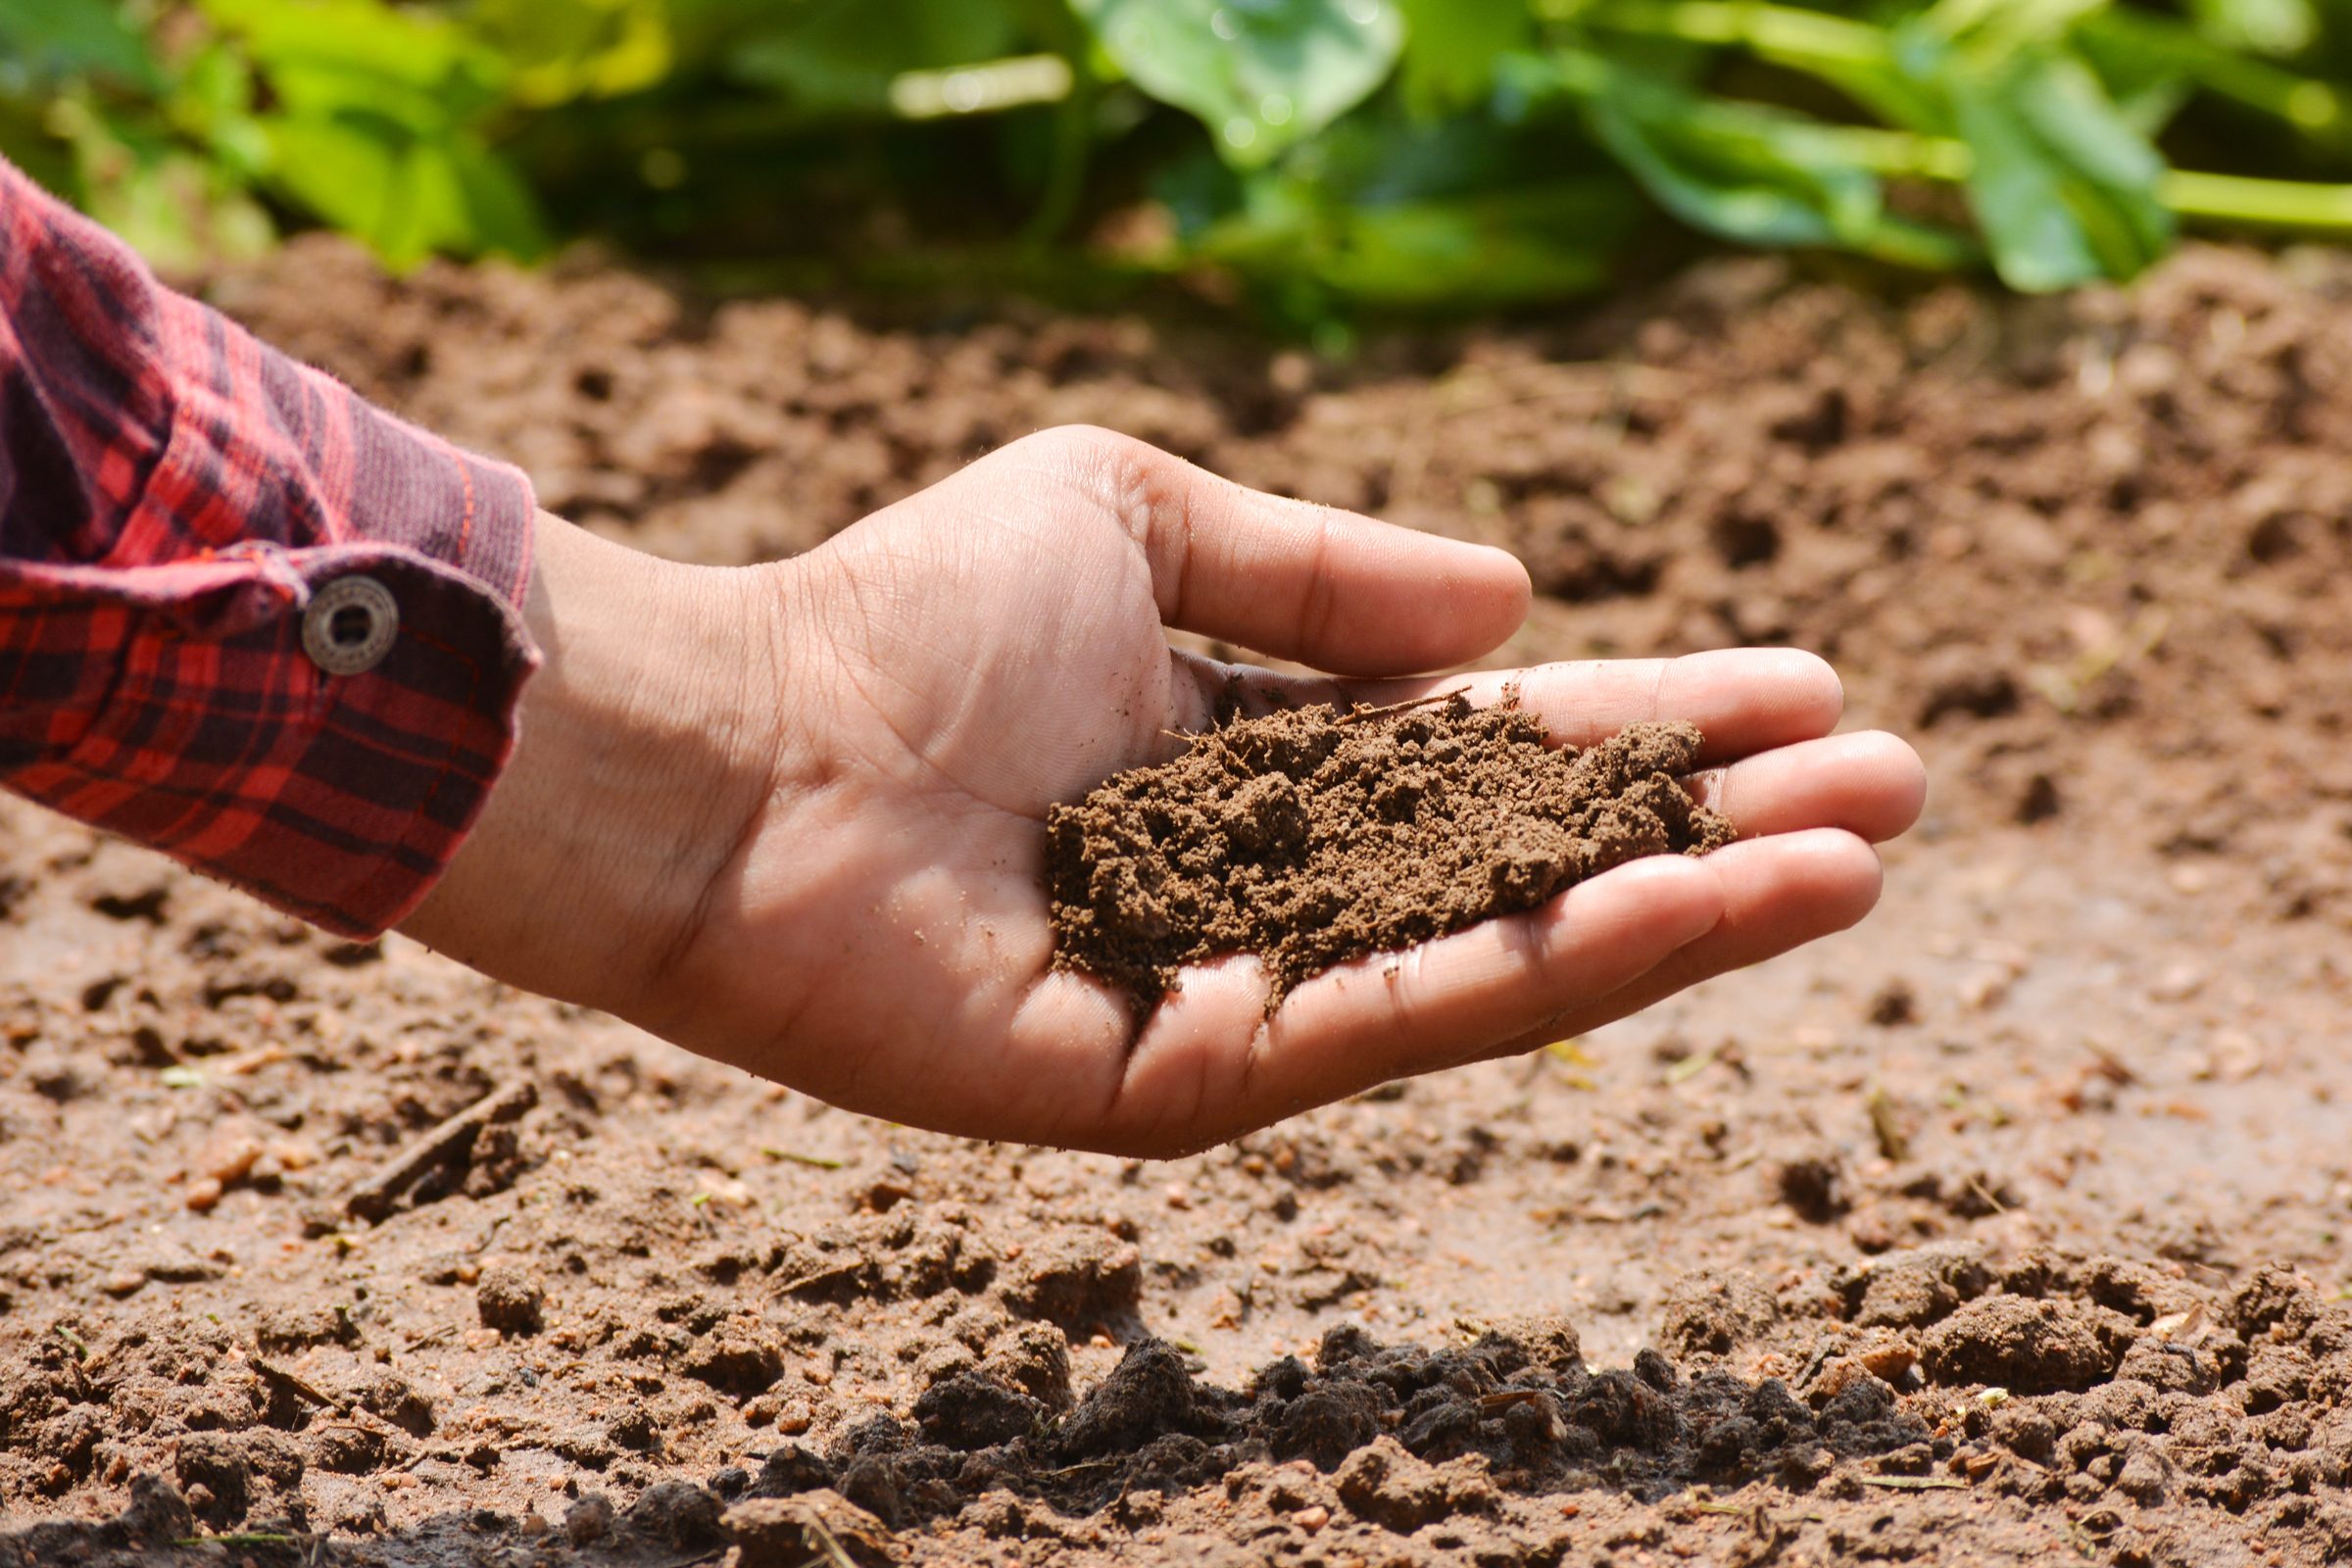 How To Test Soil pH With and Without a Kit